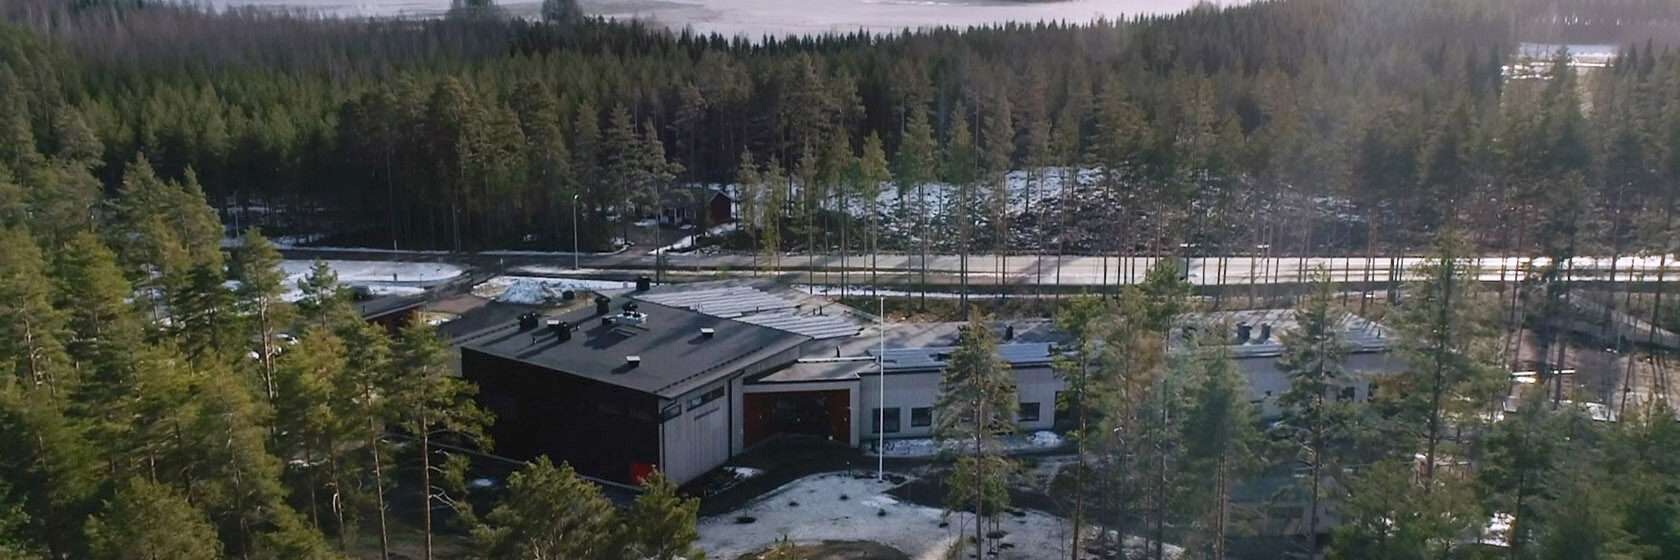 Finlands first eco school - the building is situated in a rural area